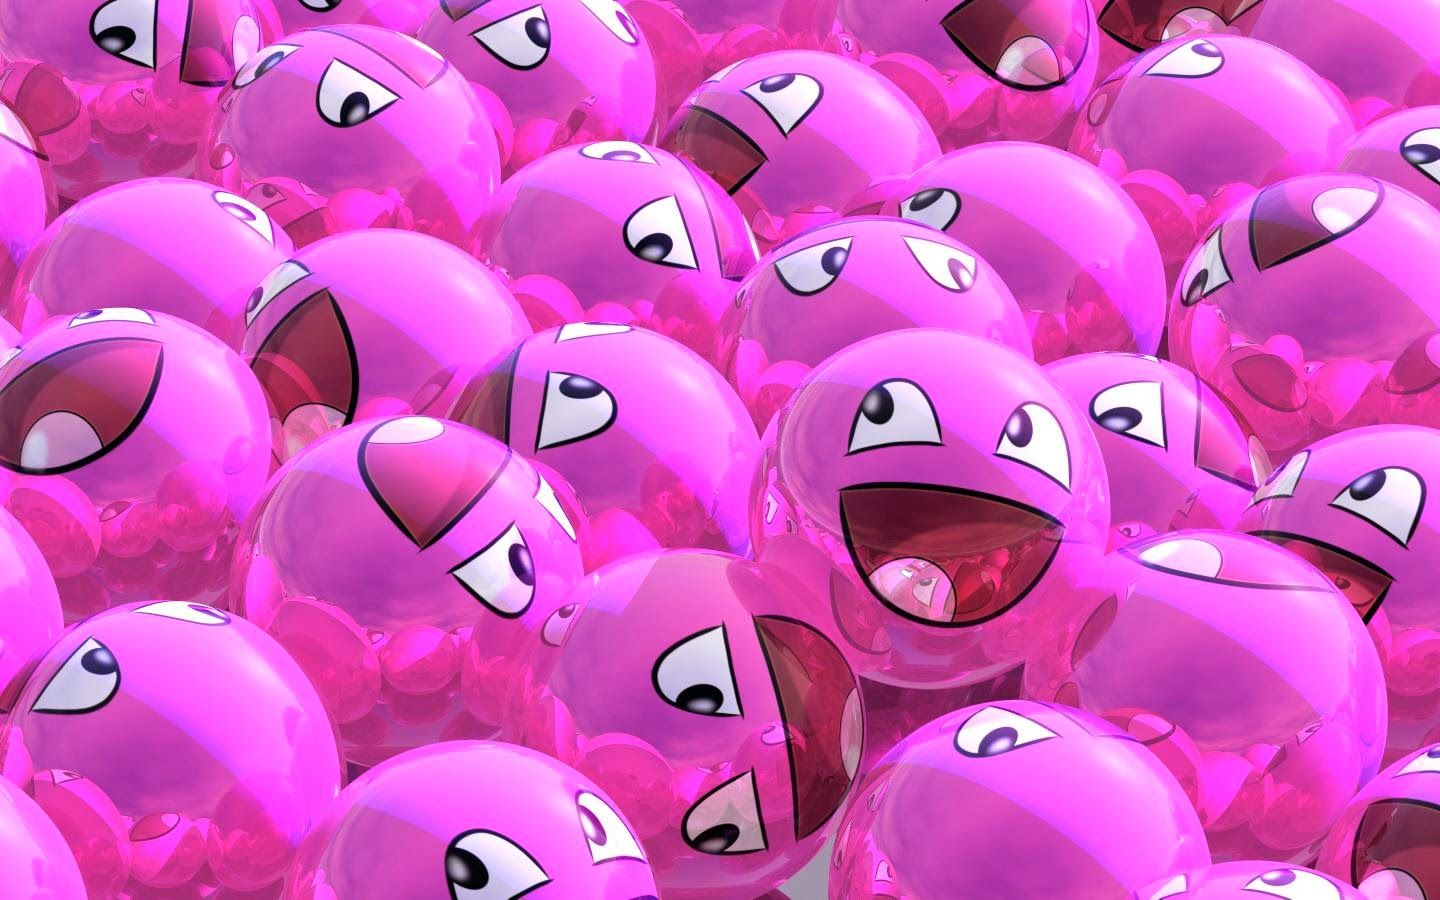 Pink Smiley Faces Wallpaper | Wallpapers9